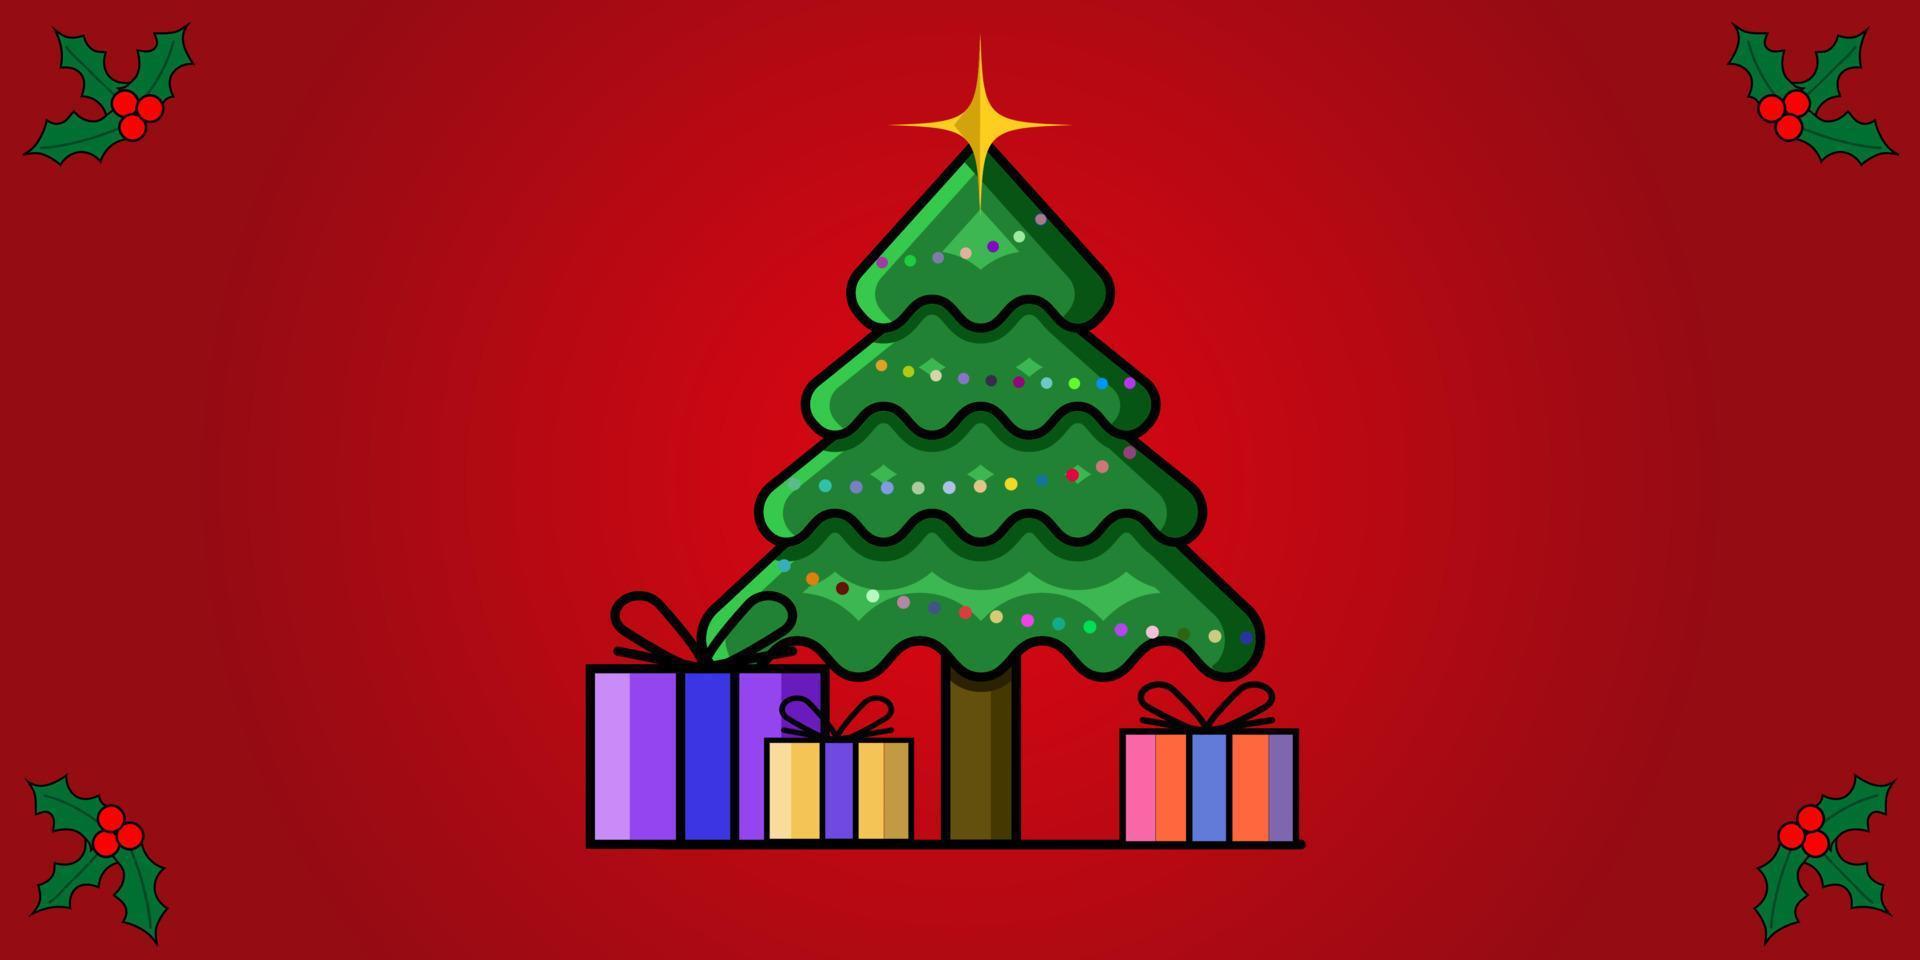 christmas tree with gifts on red background vector